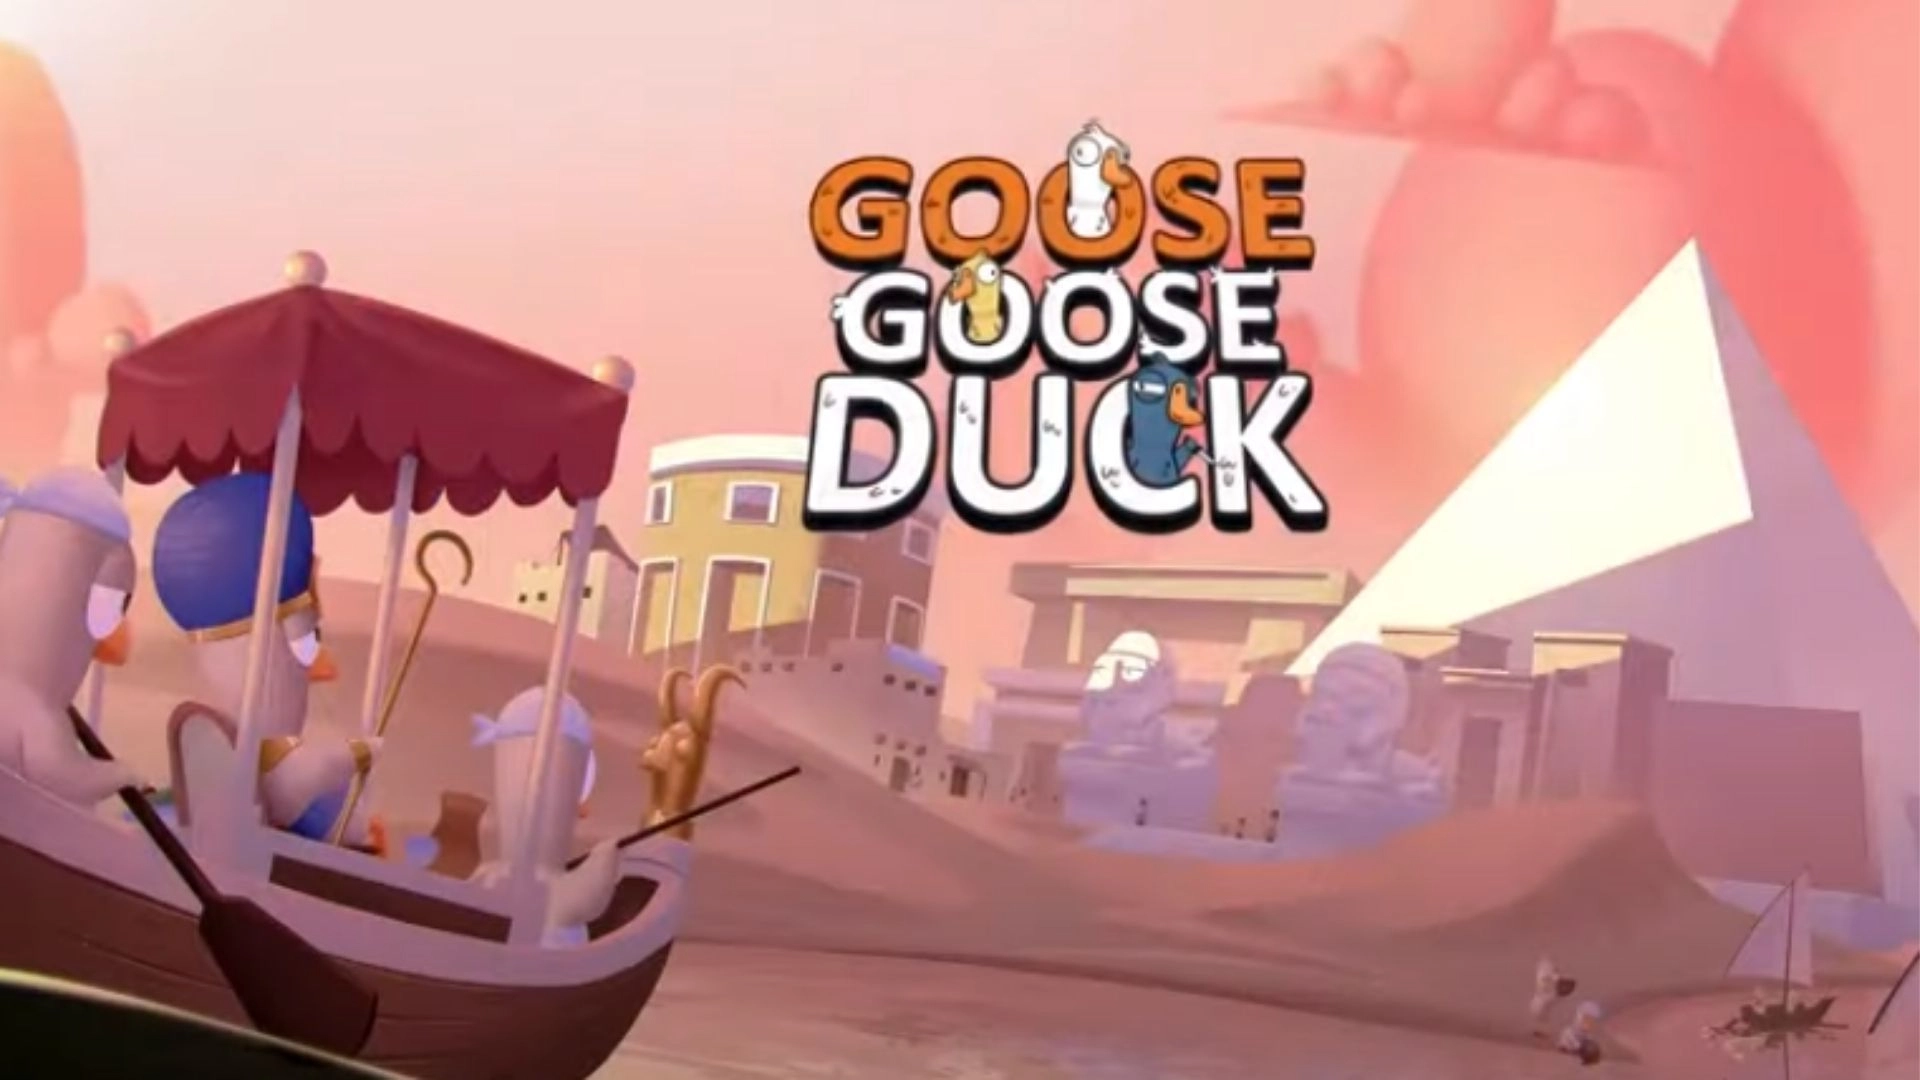 Goose Goose Duck Parents Guide and Age Rating (2021)